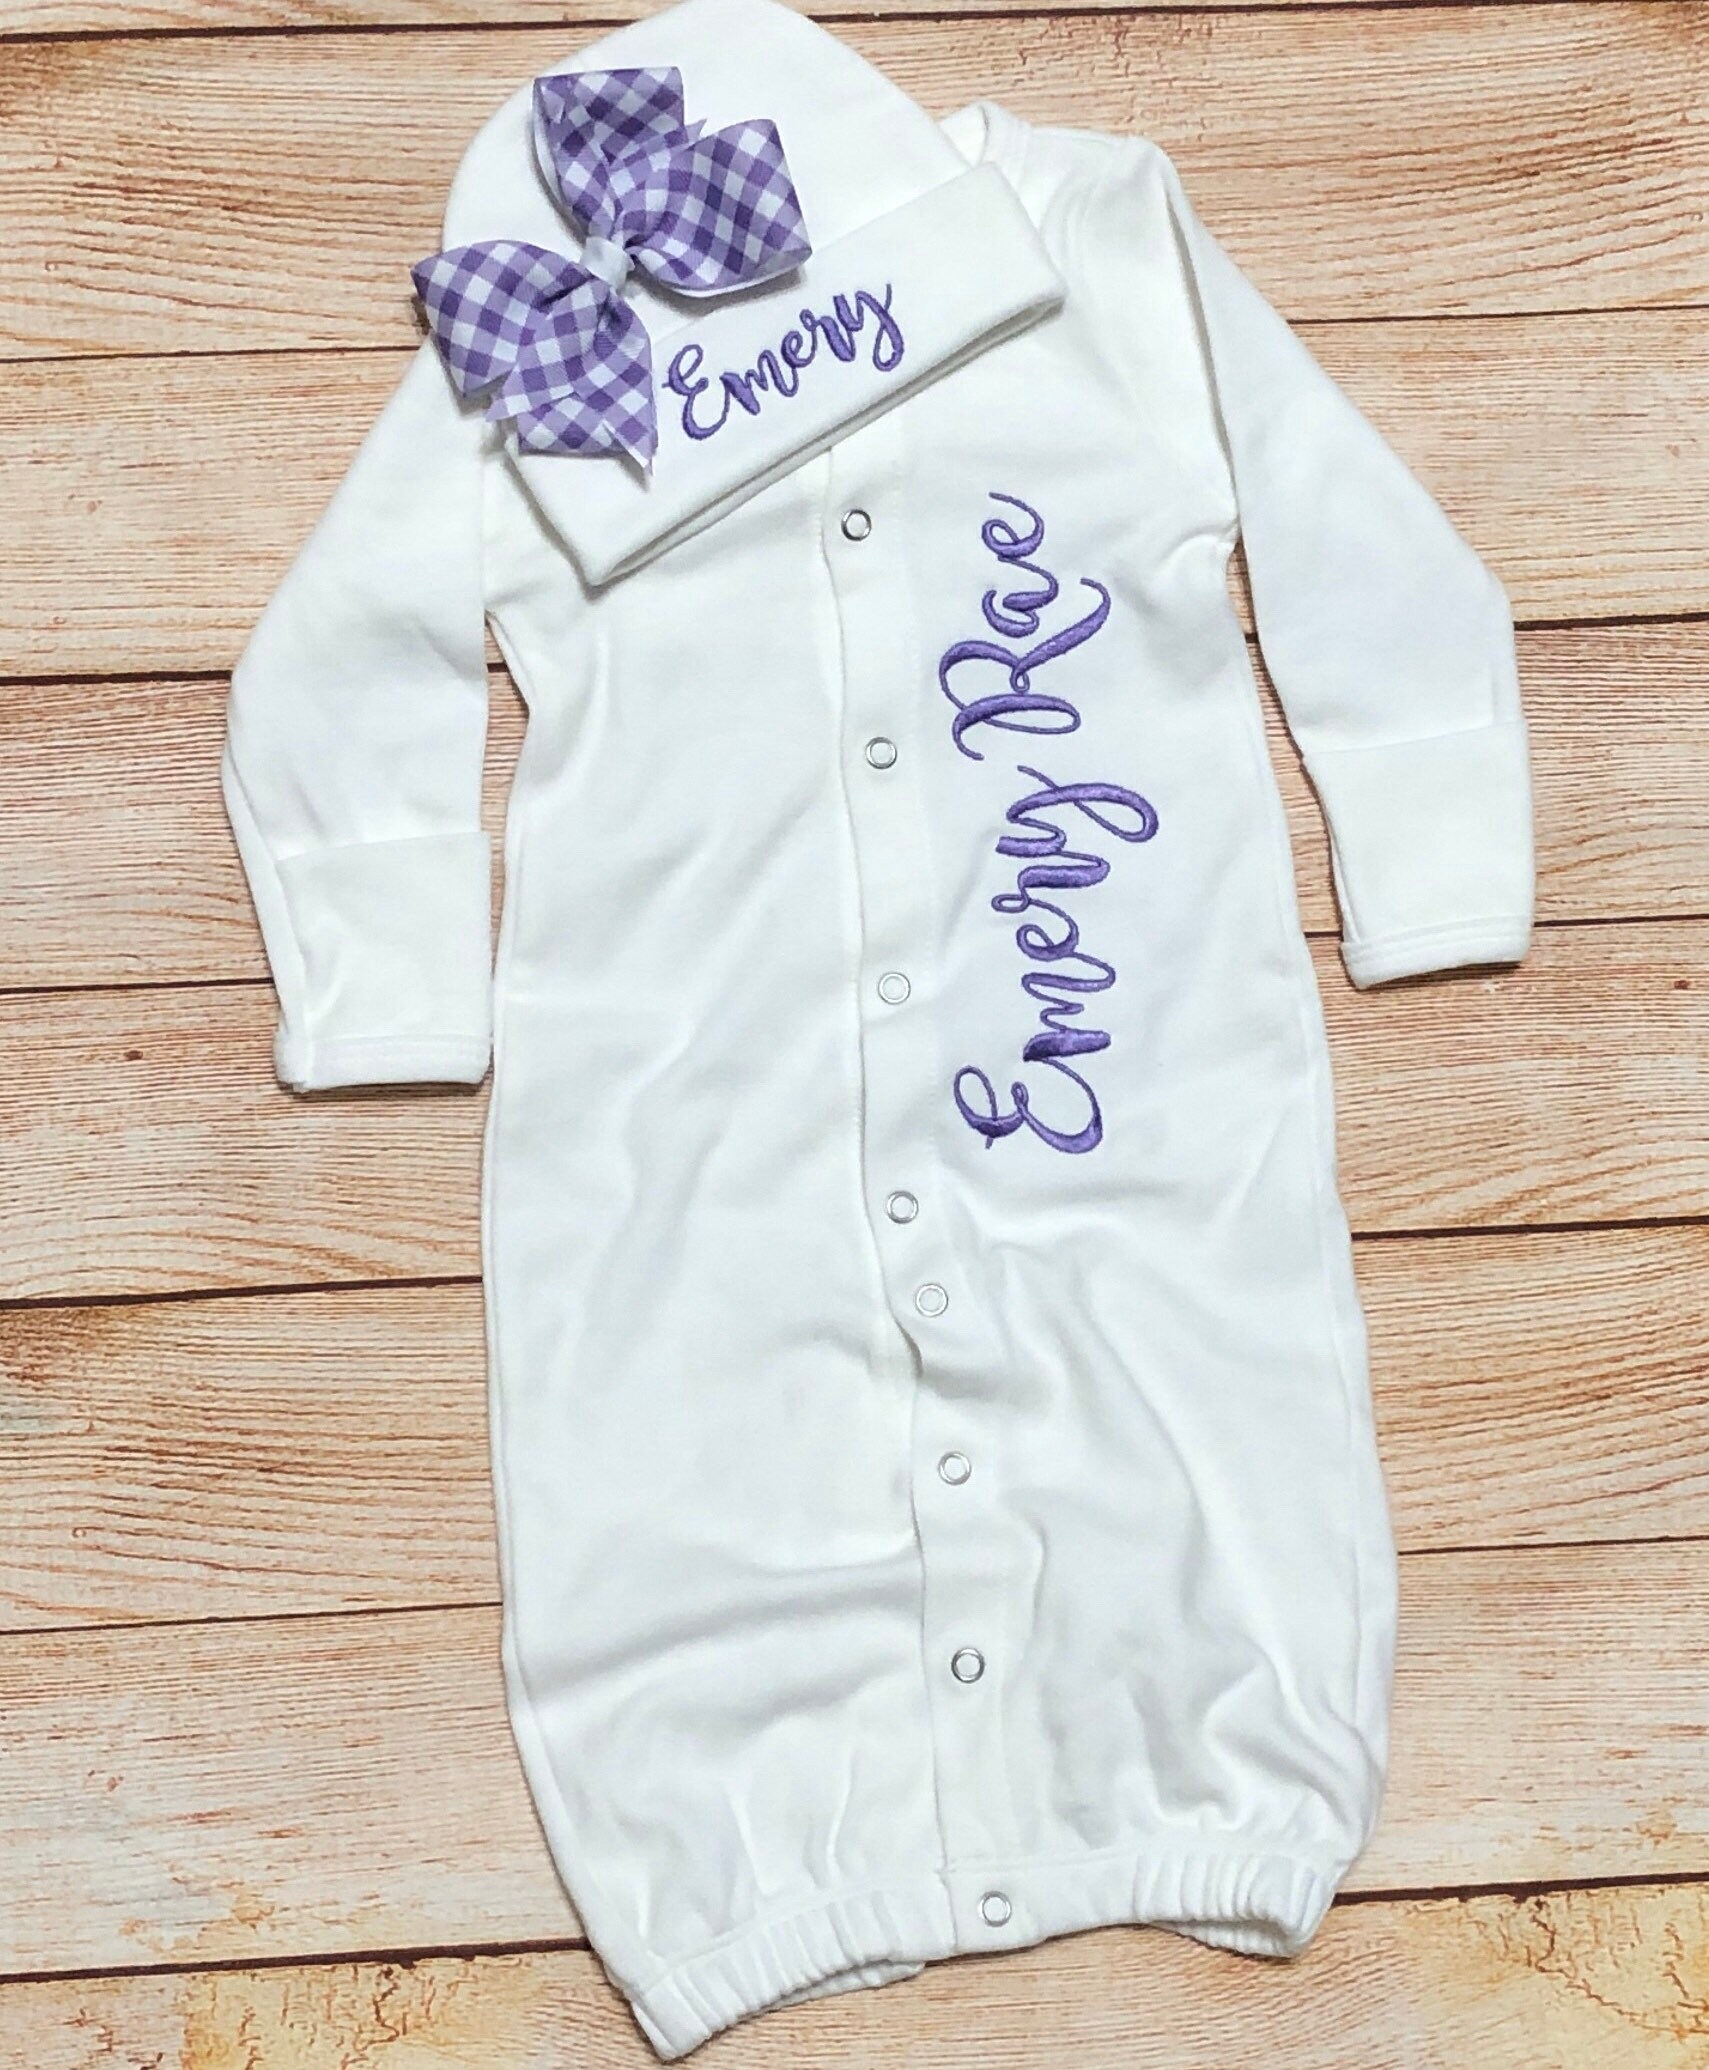 Newborn Baby Girl Coming Home Outfit Personalized Baby Outfits Lavender Kleding Meisjeskleding Babykleding voor meisjes Kledingsets Baby Girl Coming Home Outfit Purple 